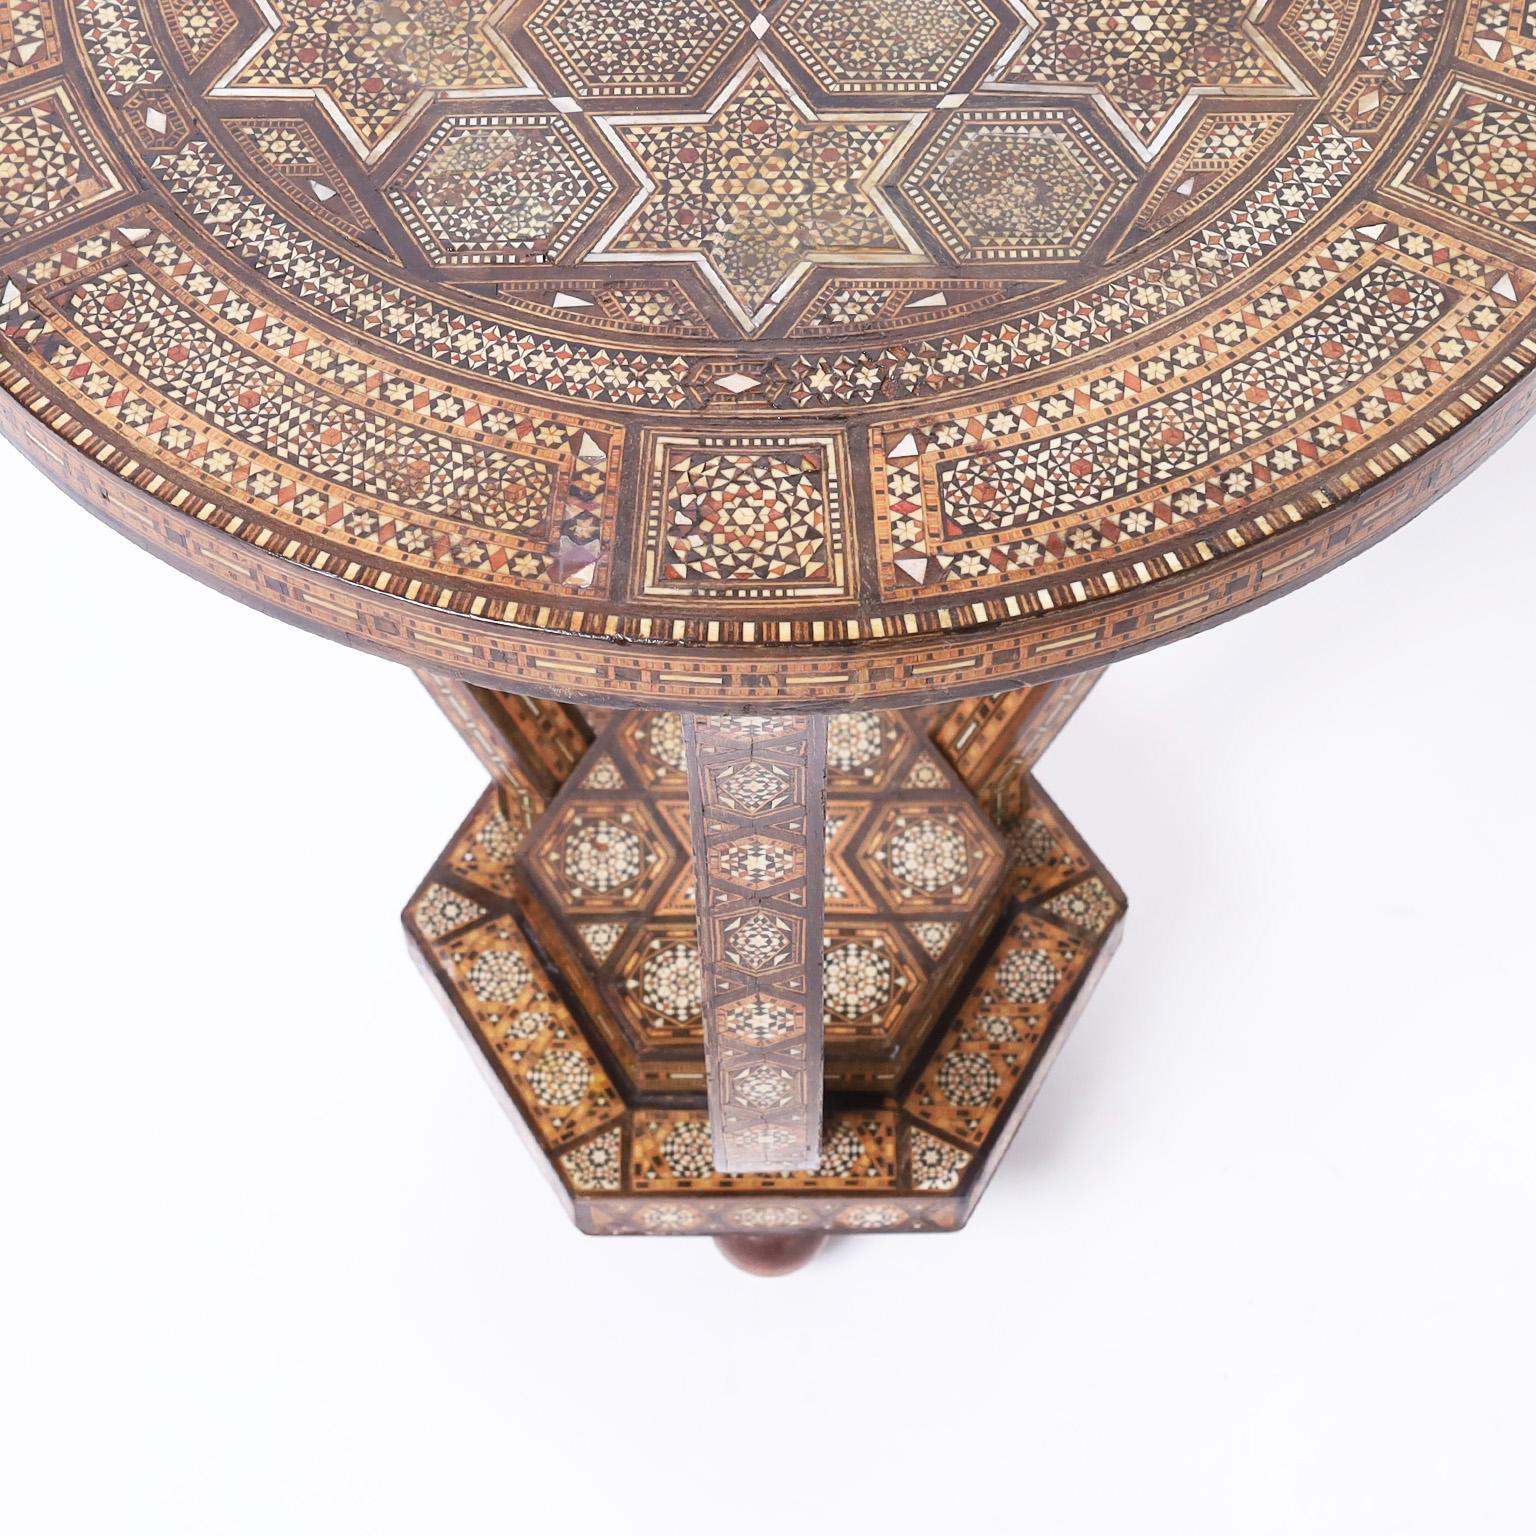 Mother-of-Pearl Vintage Moroccan Inlaid Stands or Tables